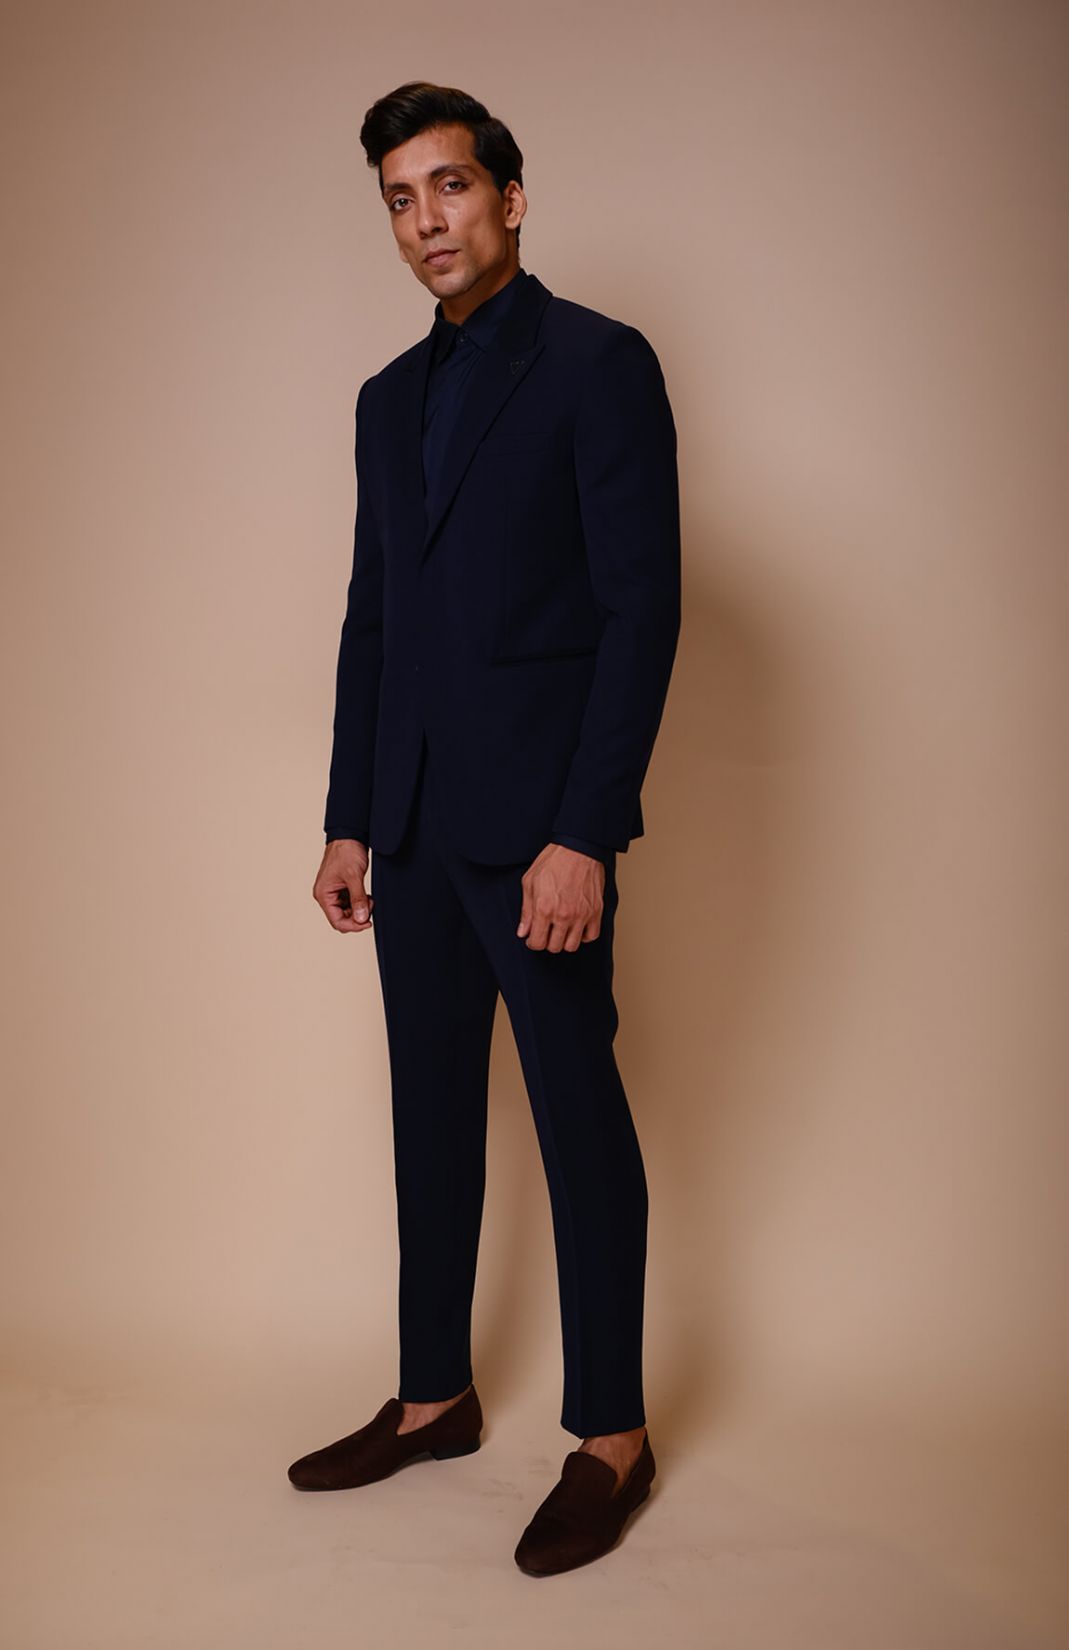 Midnight Blue Peak Suit With Triangle